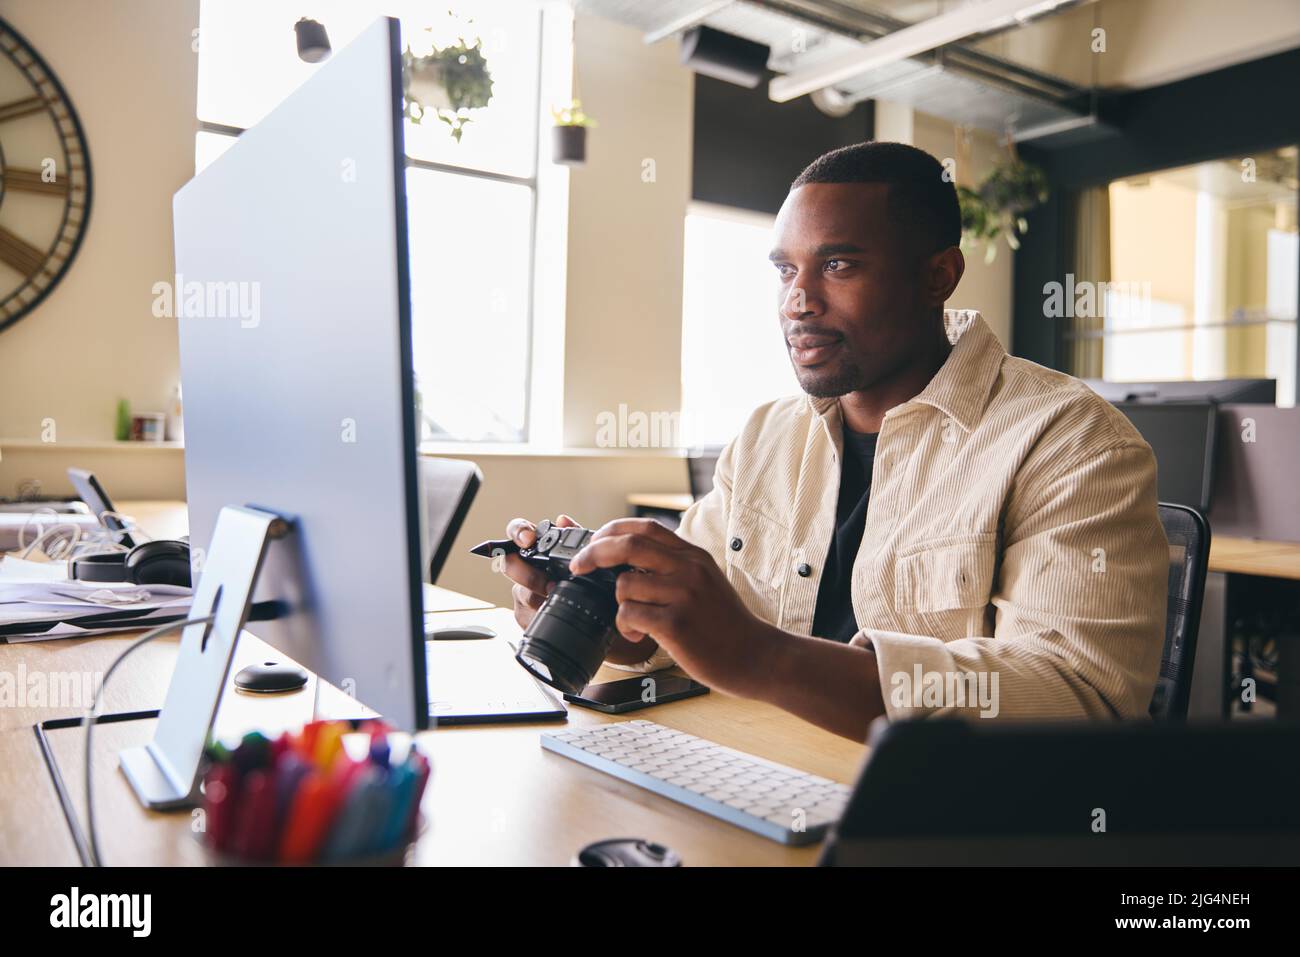 Young Black Professional Photographer Sitting At Desk Working On Computer Holding Camera Editing Pictures Stock Photo